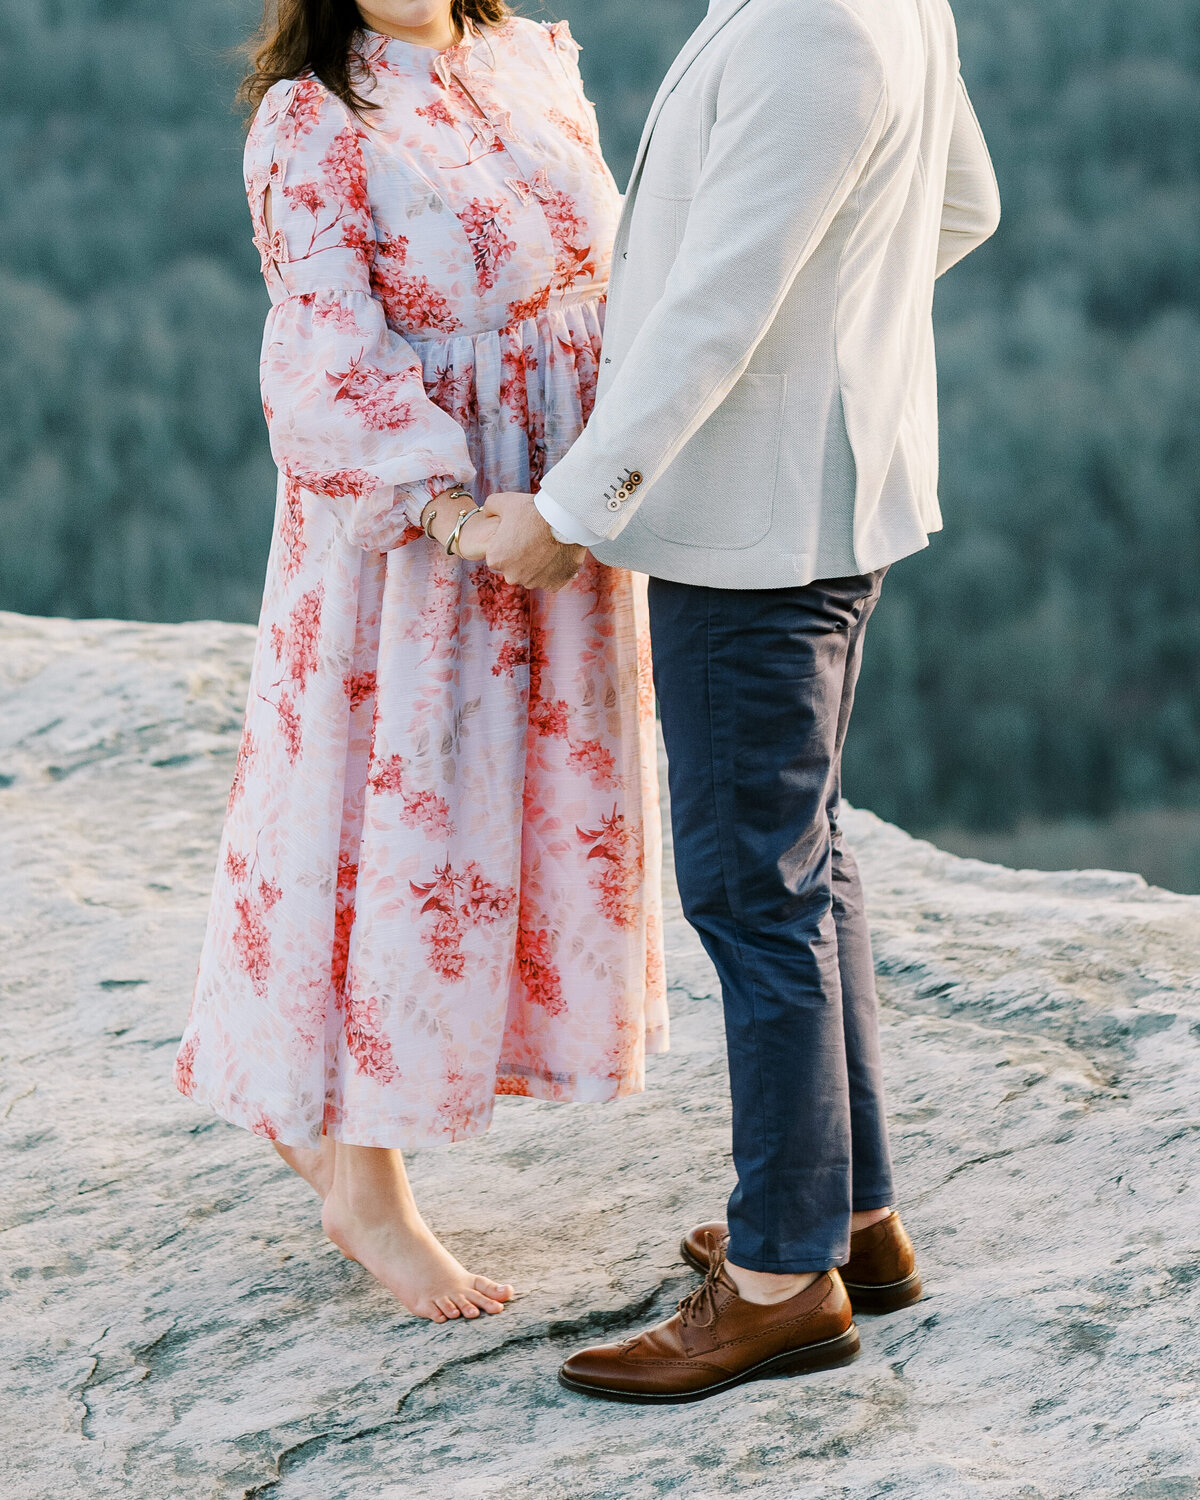 The Fourniers | Grandfather Mountain Engagement-84